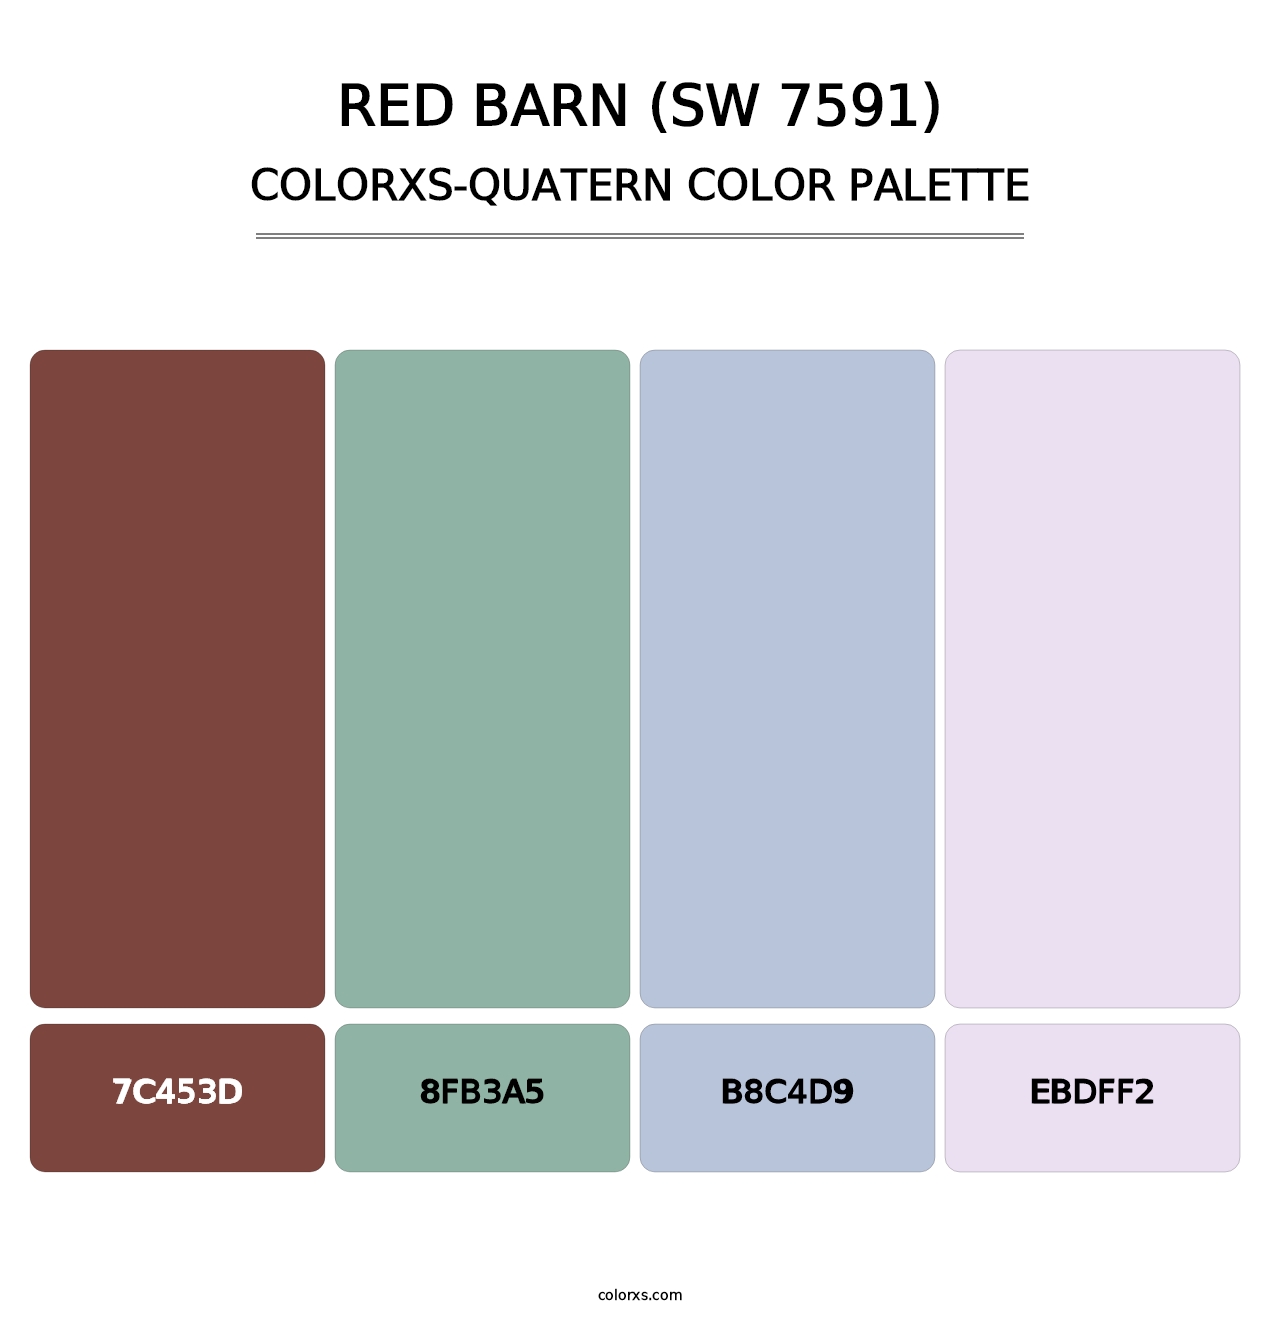 Red Barn (SW 7591) - Colorxs Quatern Palette